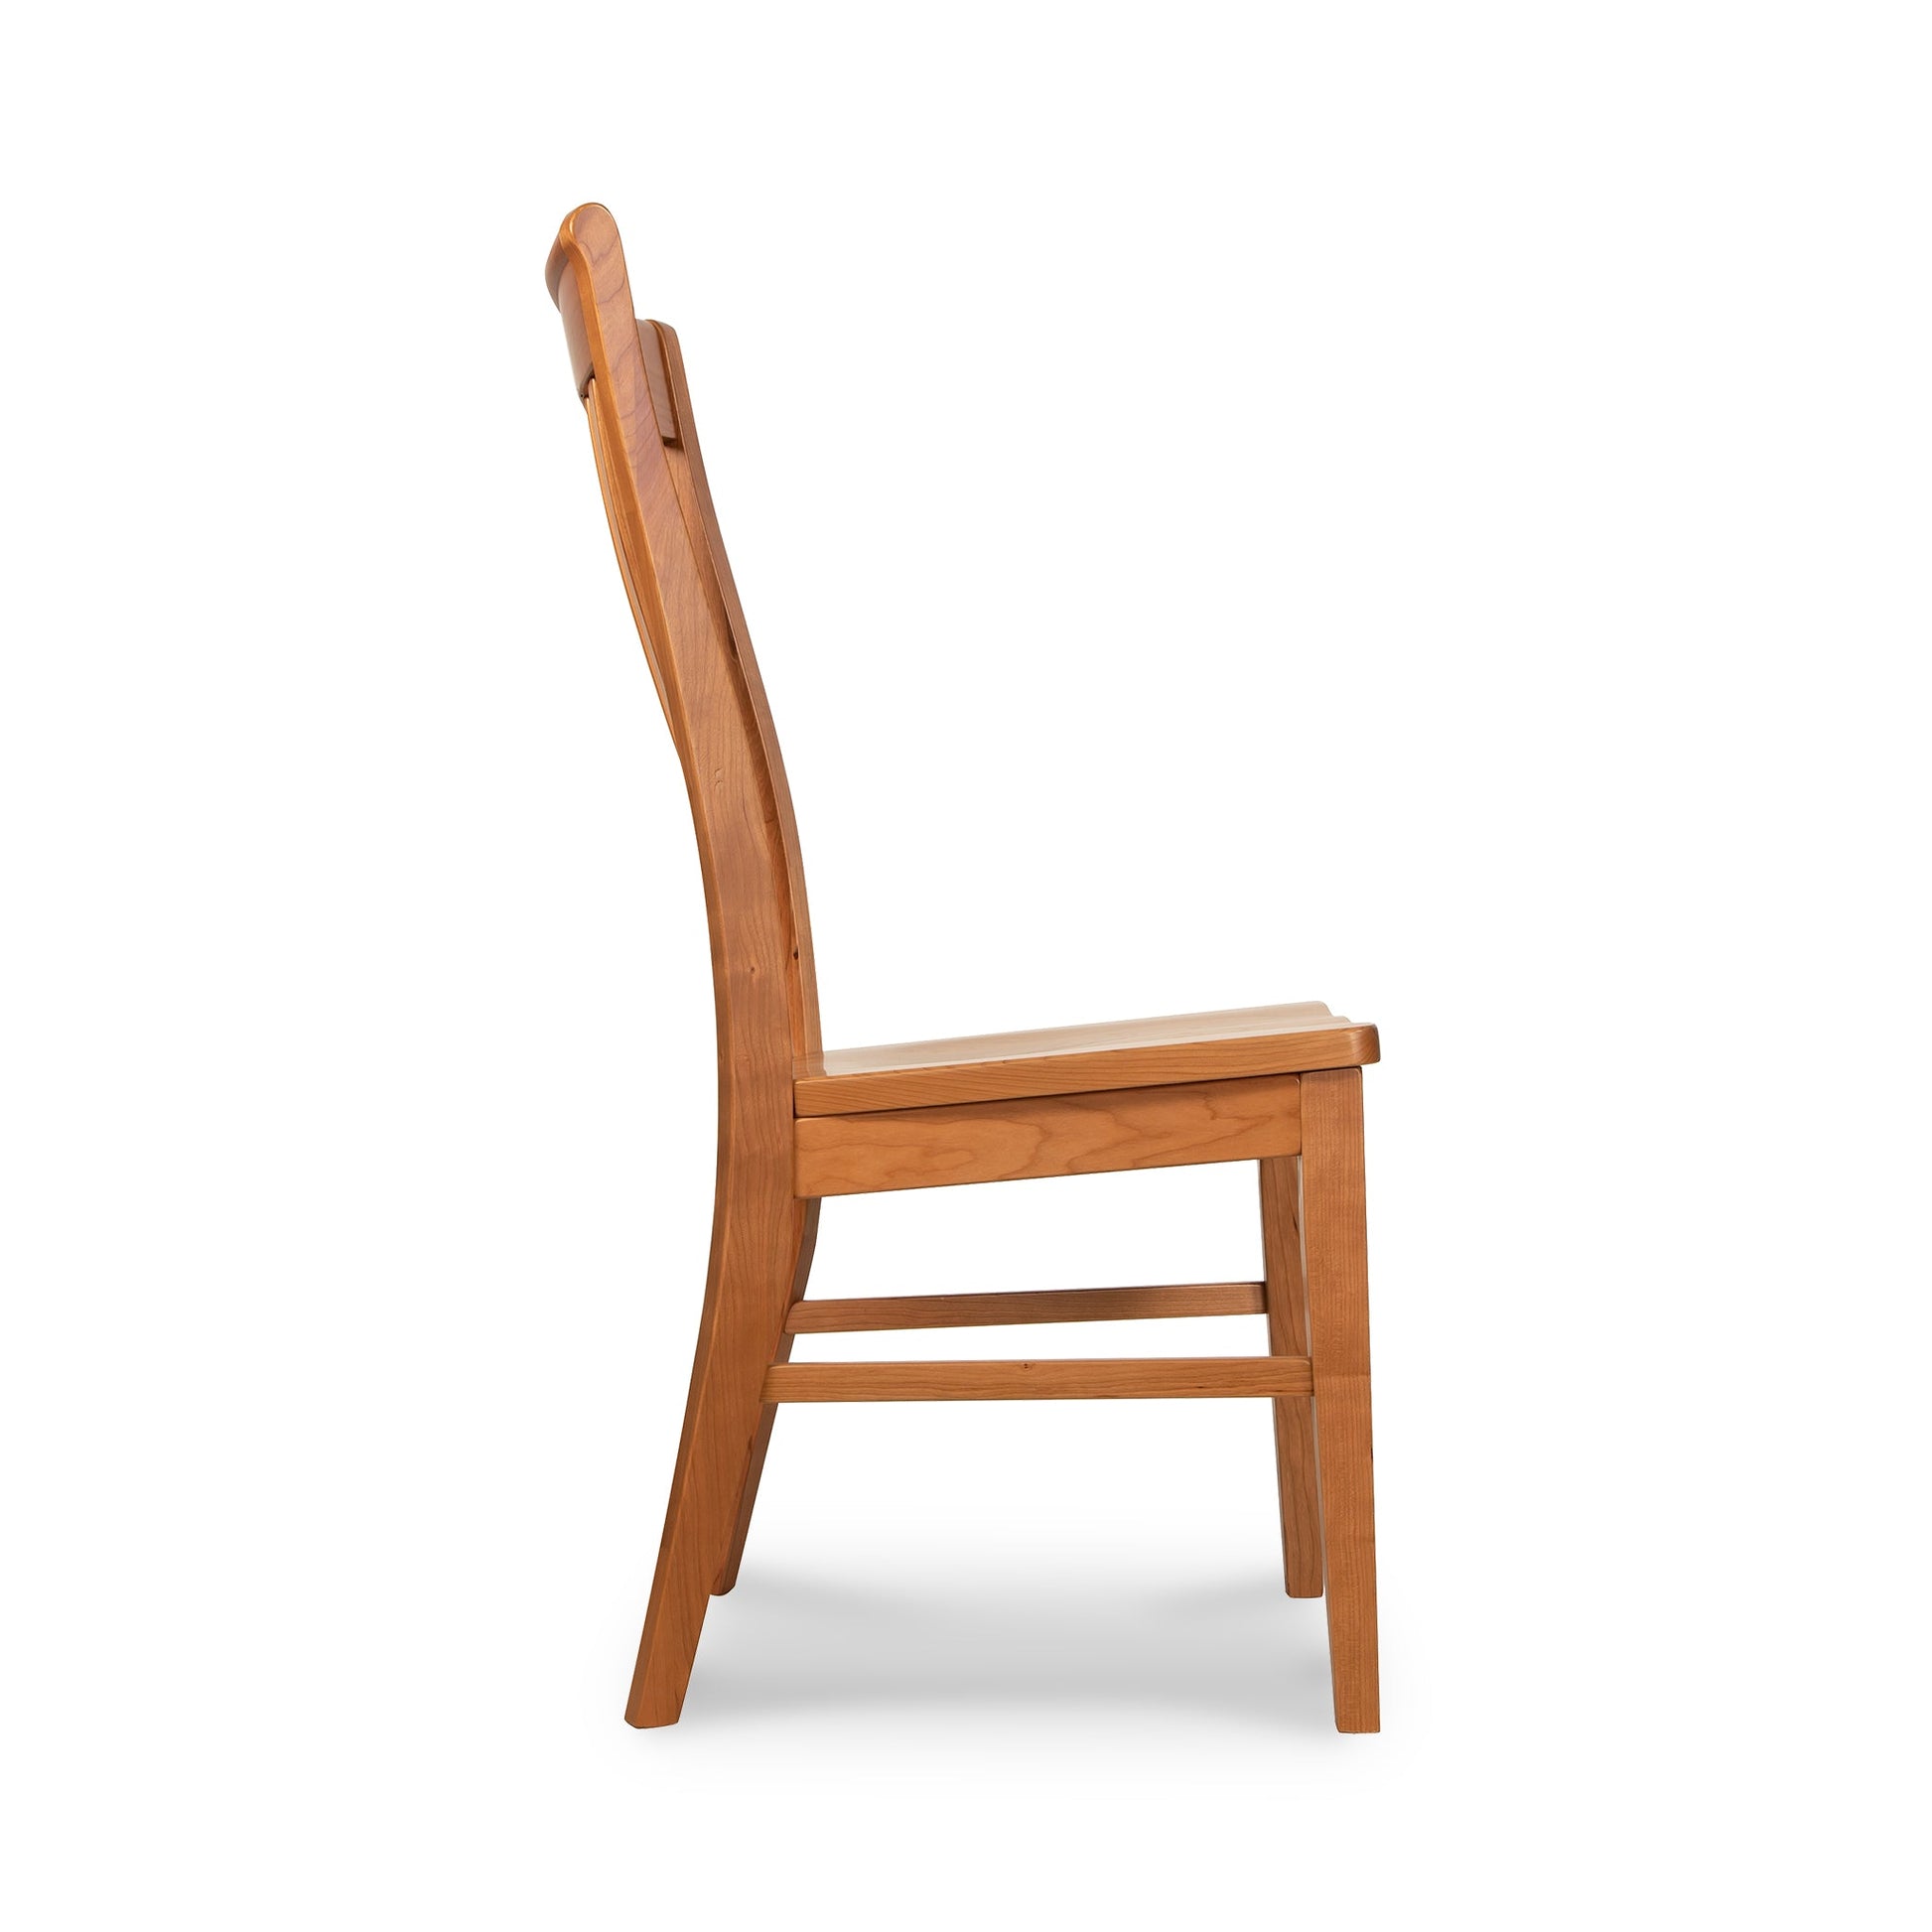 A Country Shaker Side Chair with Scooped Wooden Seat - Ready to Ship by Vermont Woods Studios on a white background.